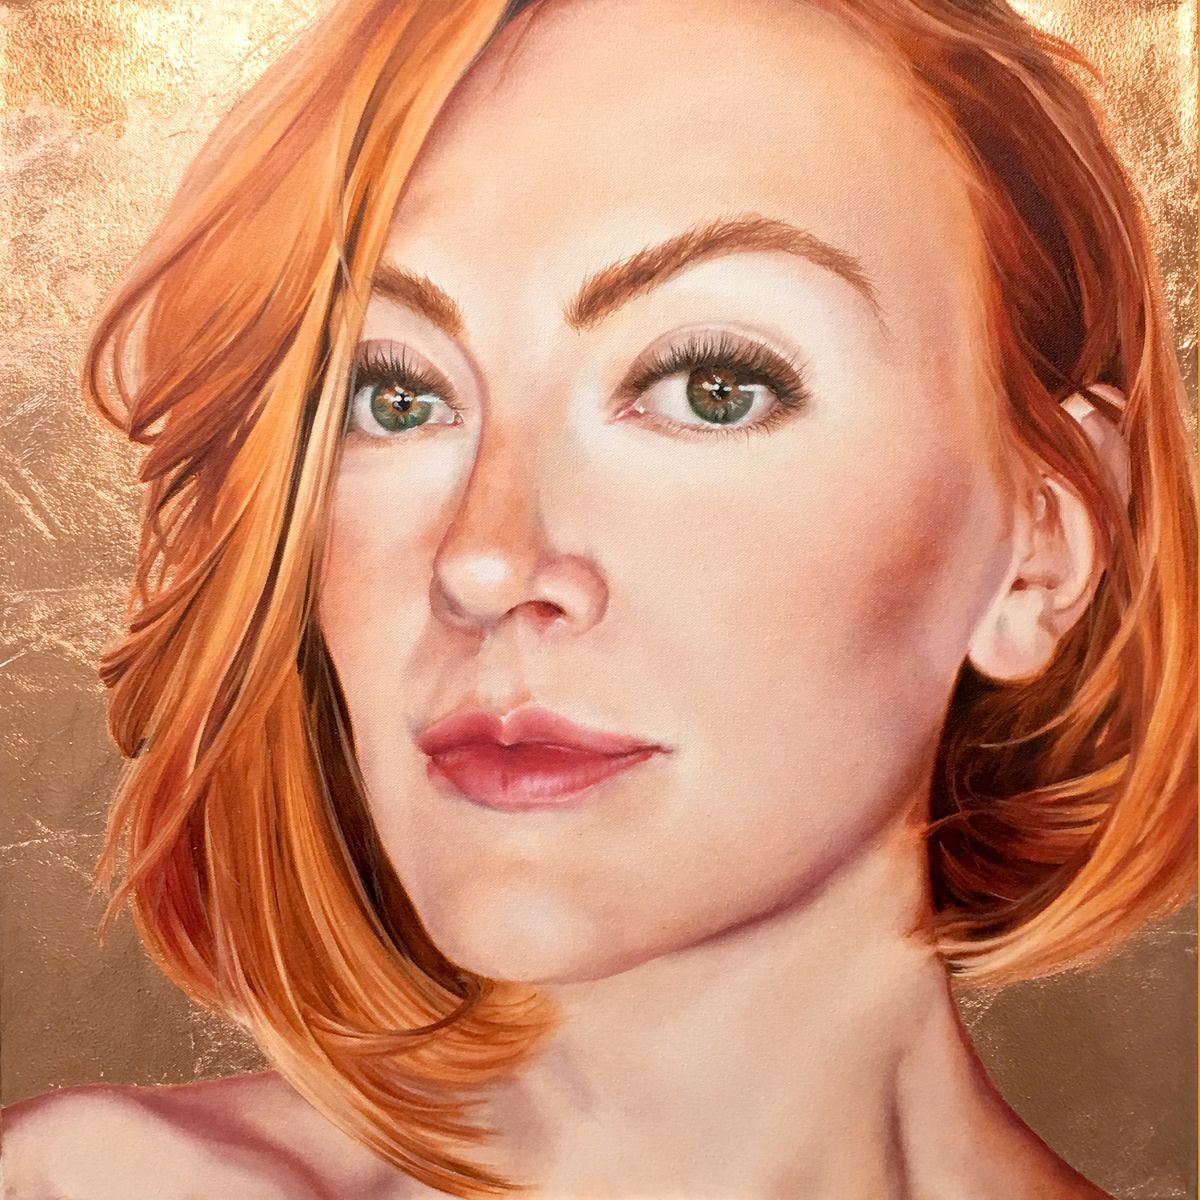 The Girl with the Ginger Hair by Ginger Del Rey